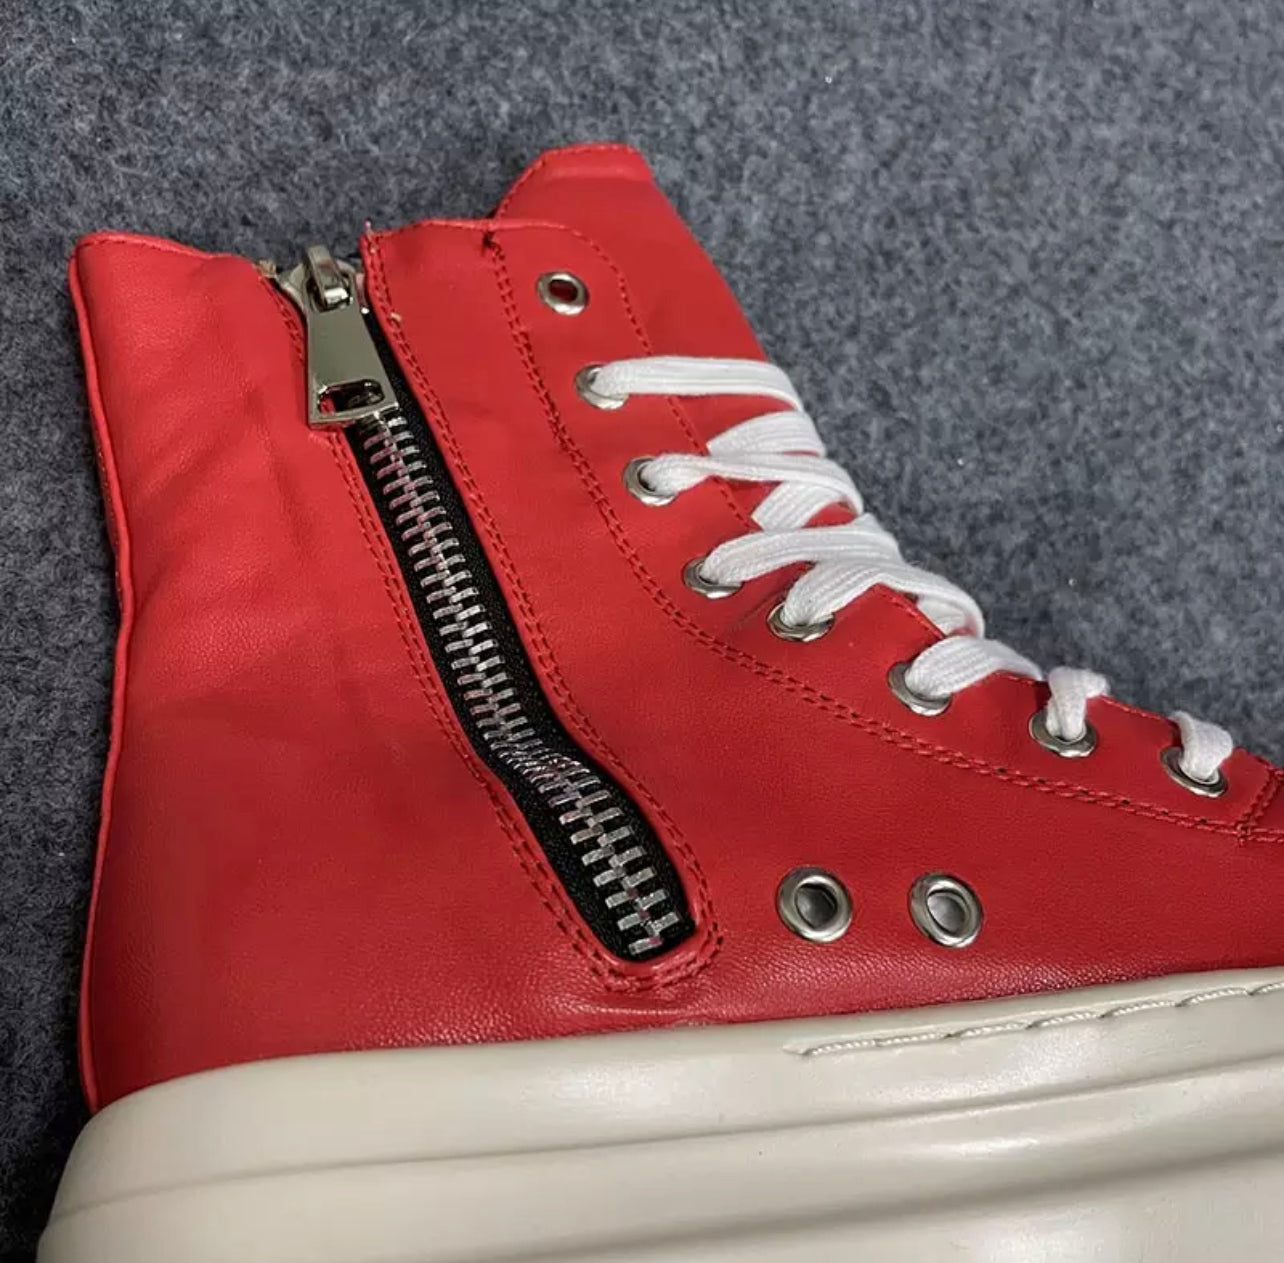 High Top Leather Sneakers Thick Bottoms (RED) - Feelin' Myself Boutique